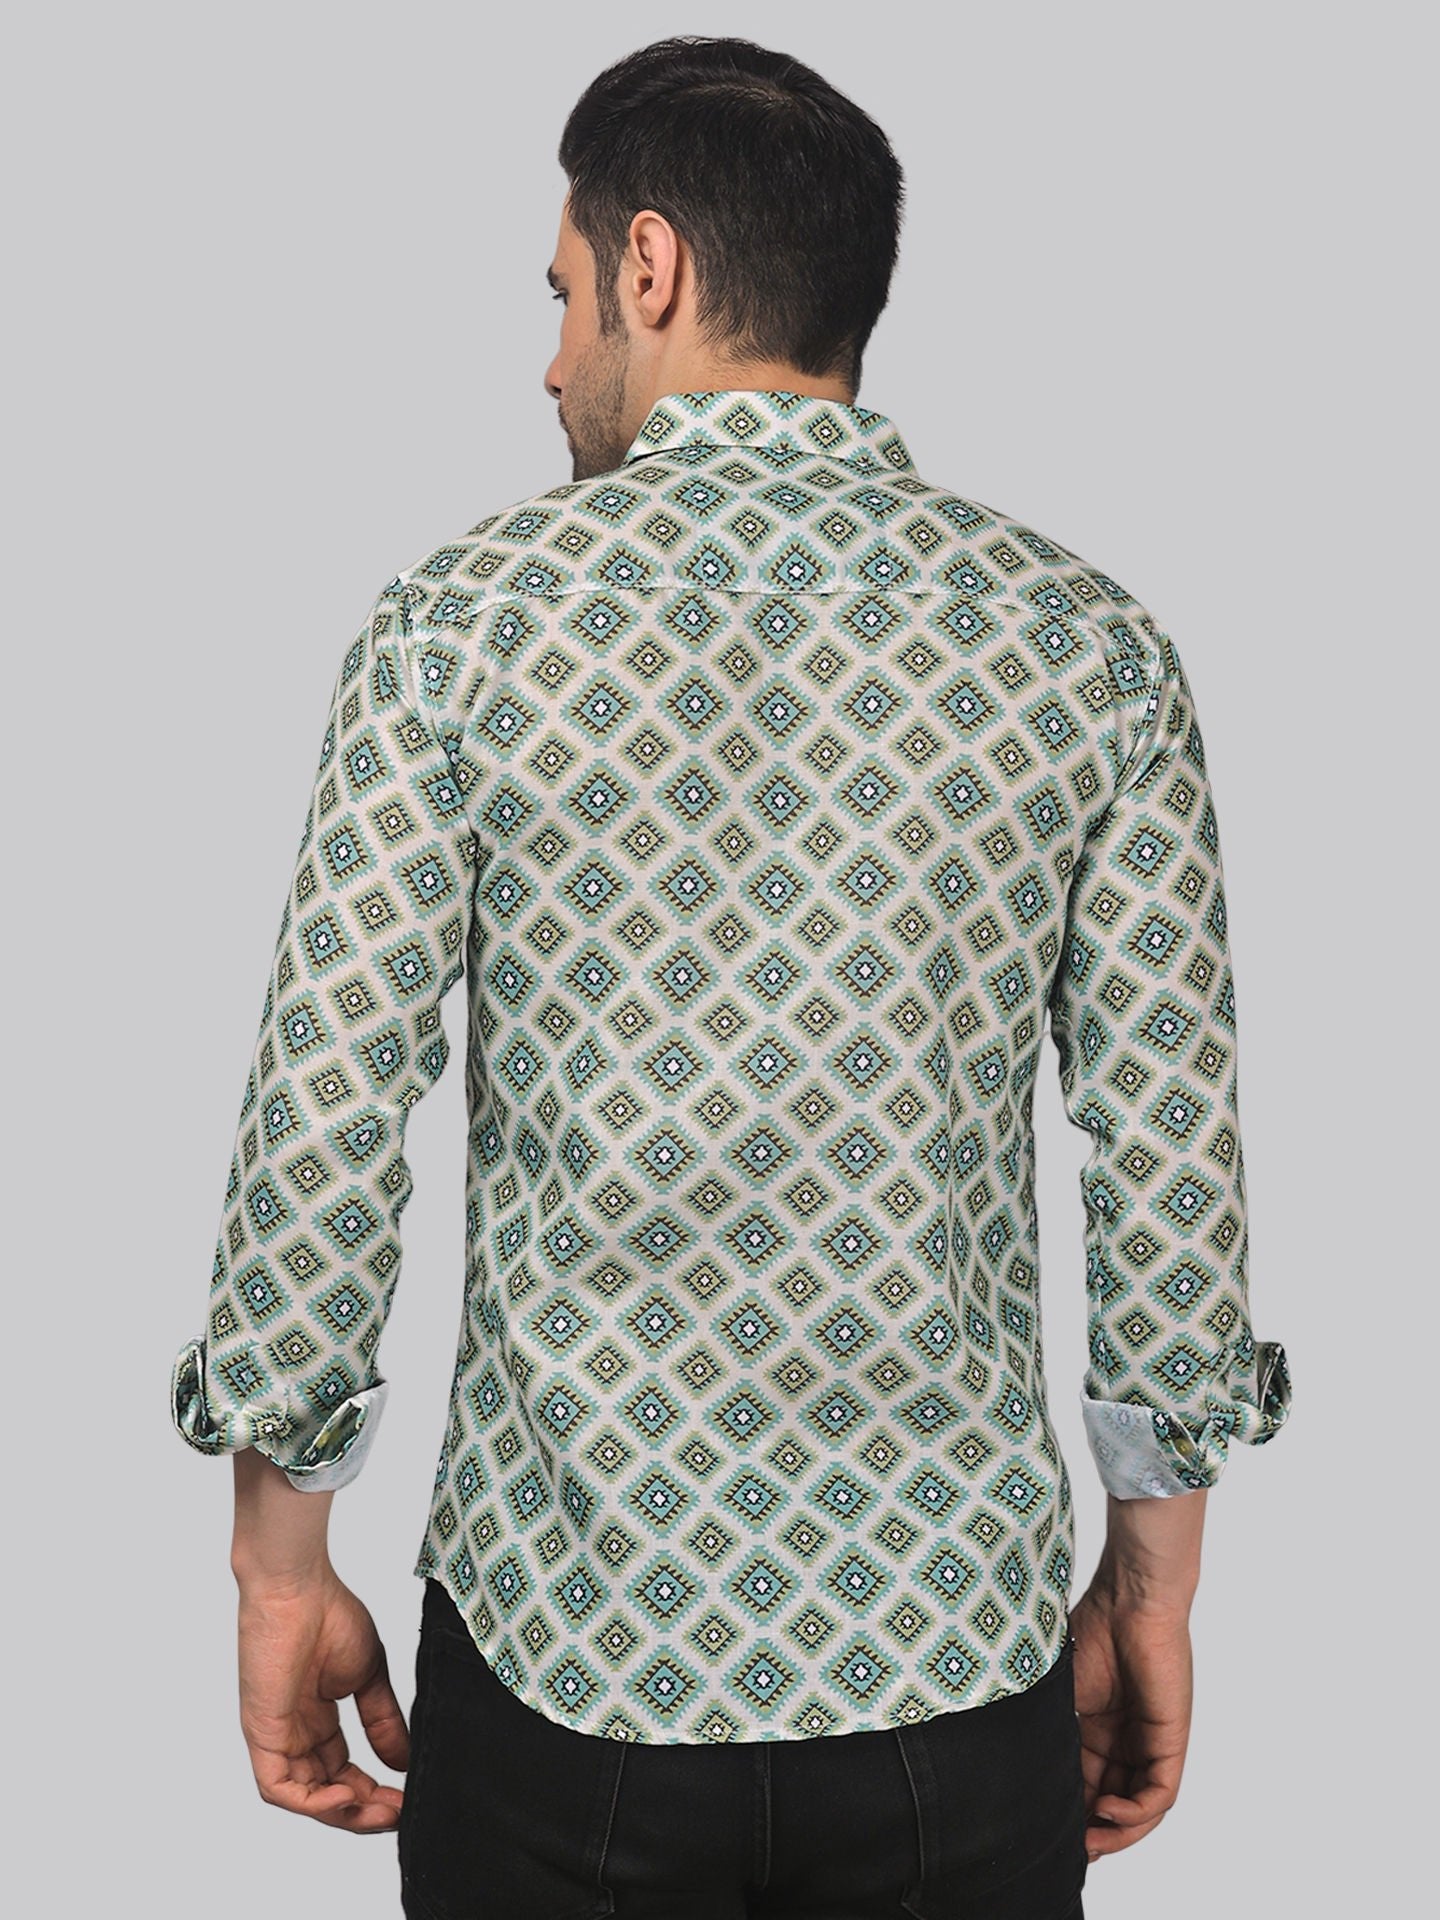 Delicate Men's Printed Full Sleeve Casual Linen Shirt - TryBuy® USA🇺🇸